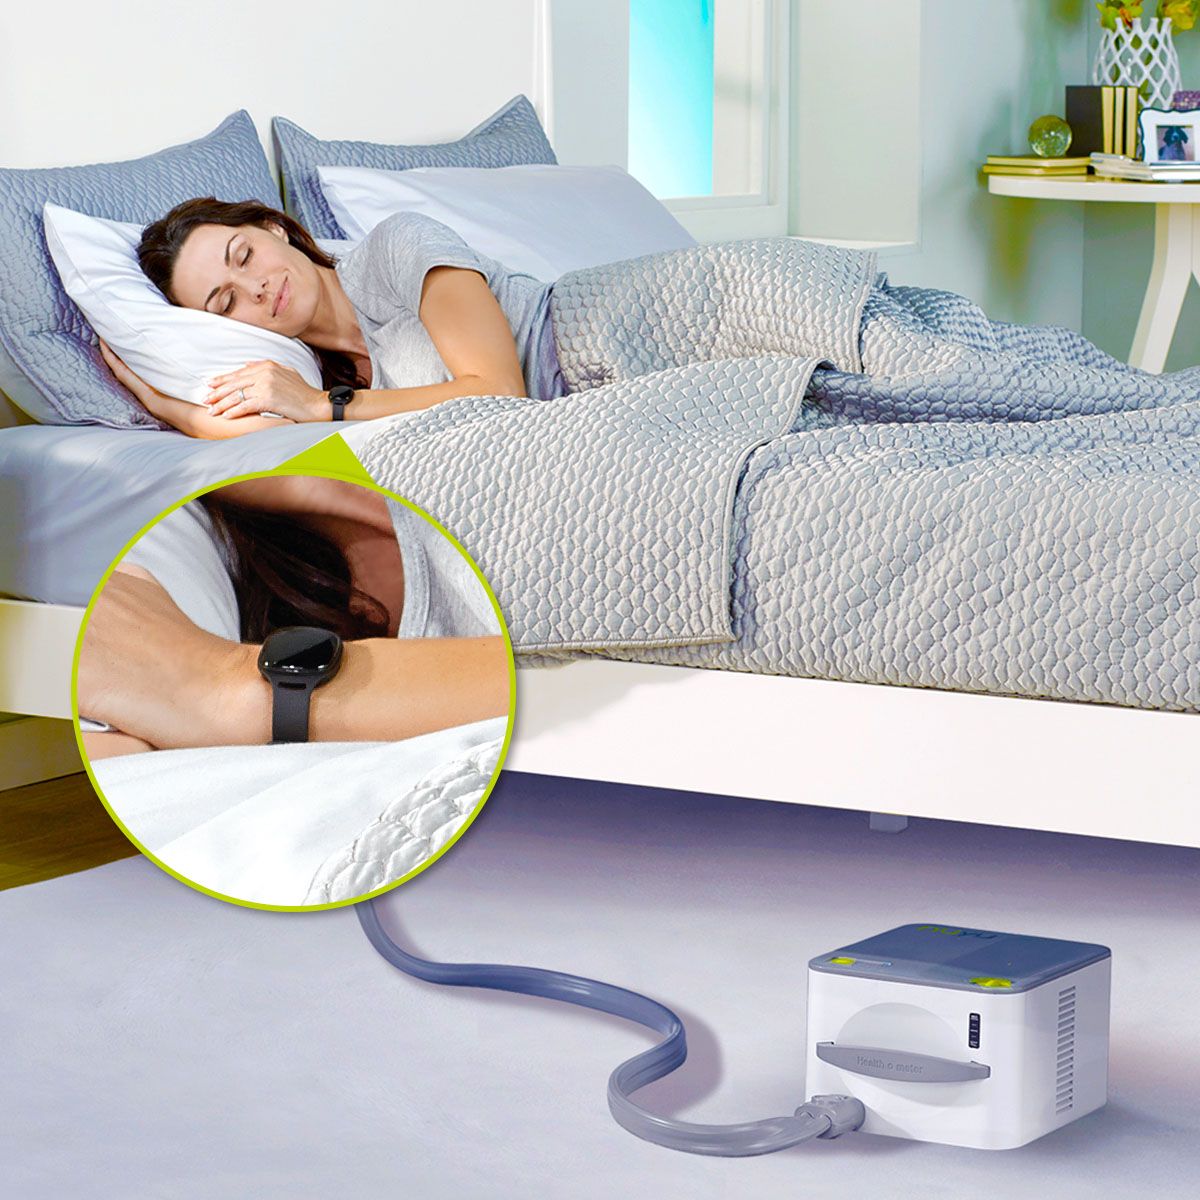 The Sleep System cools and warms your bed to your ideal ...